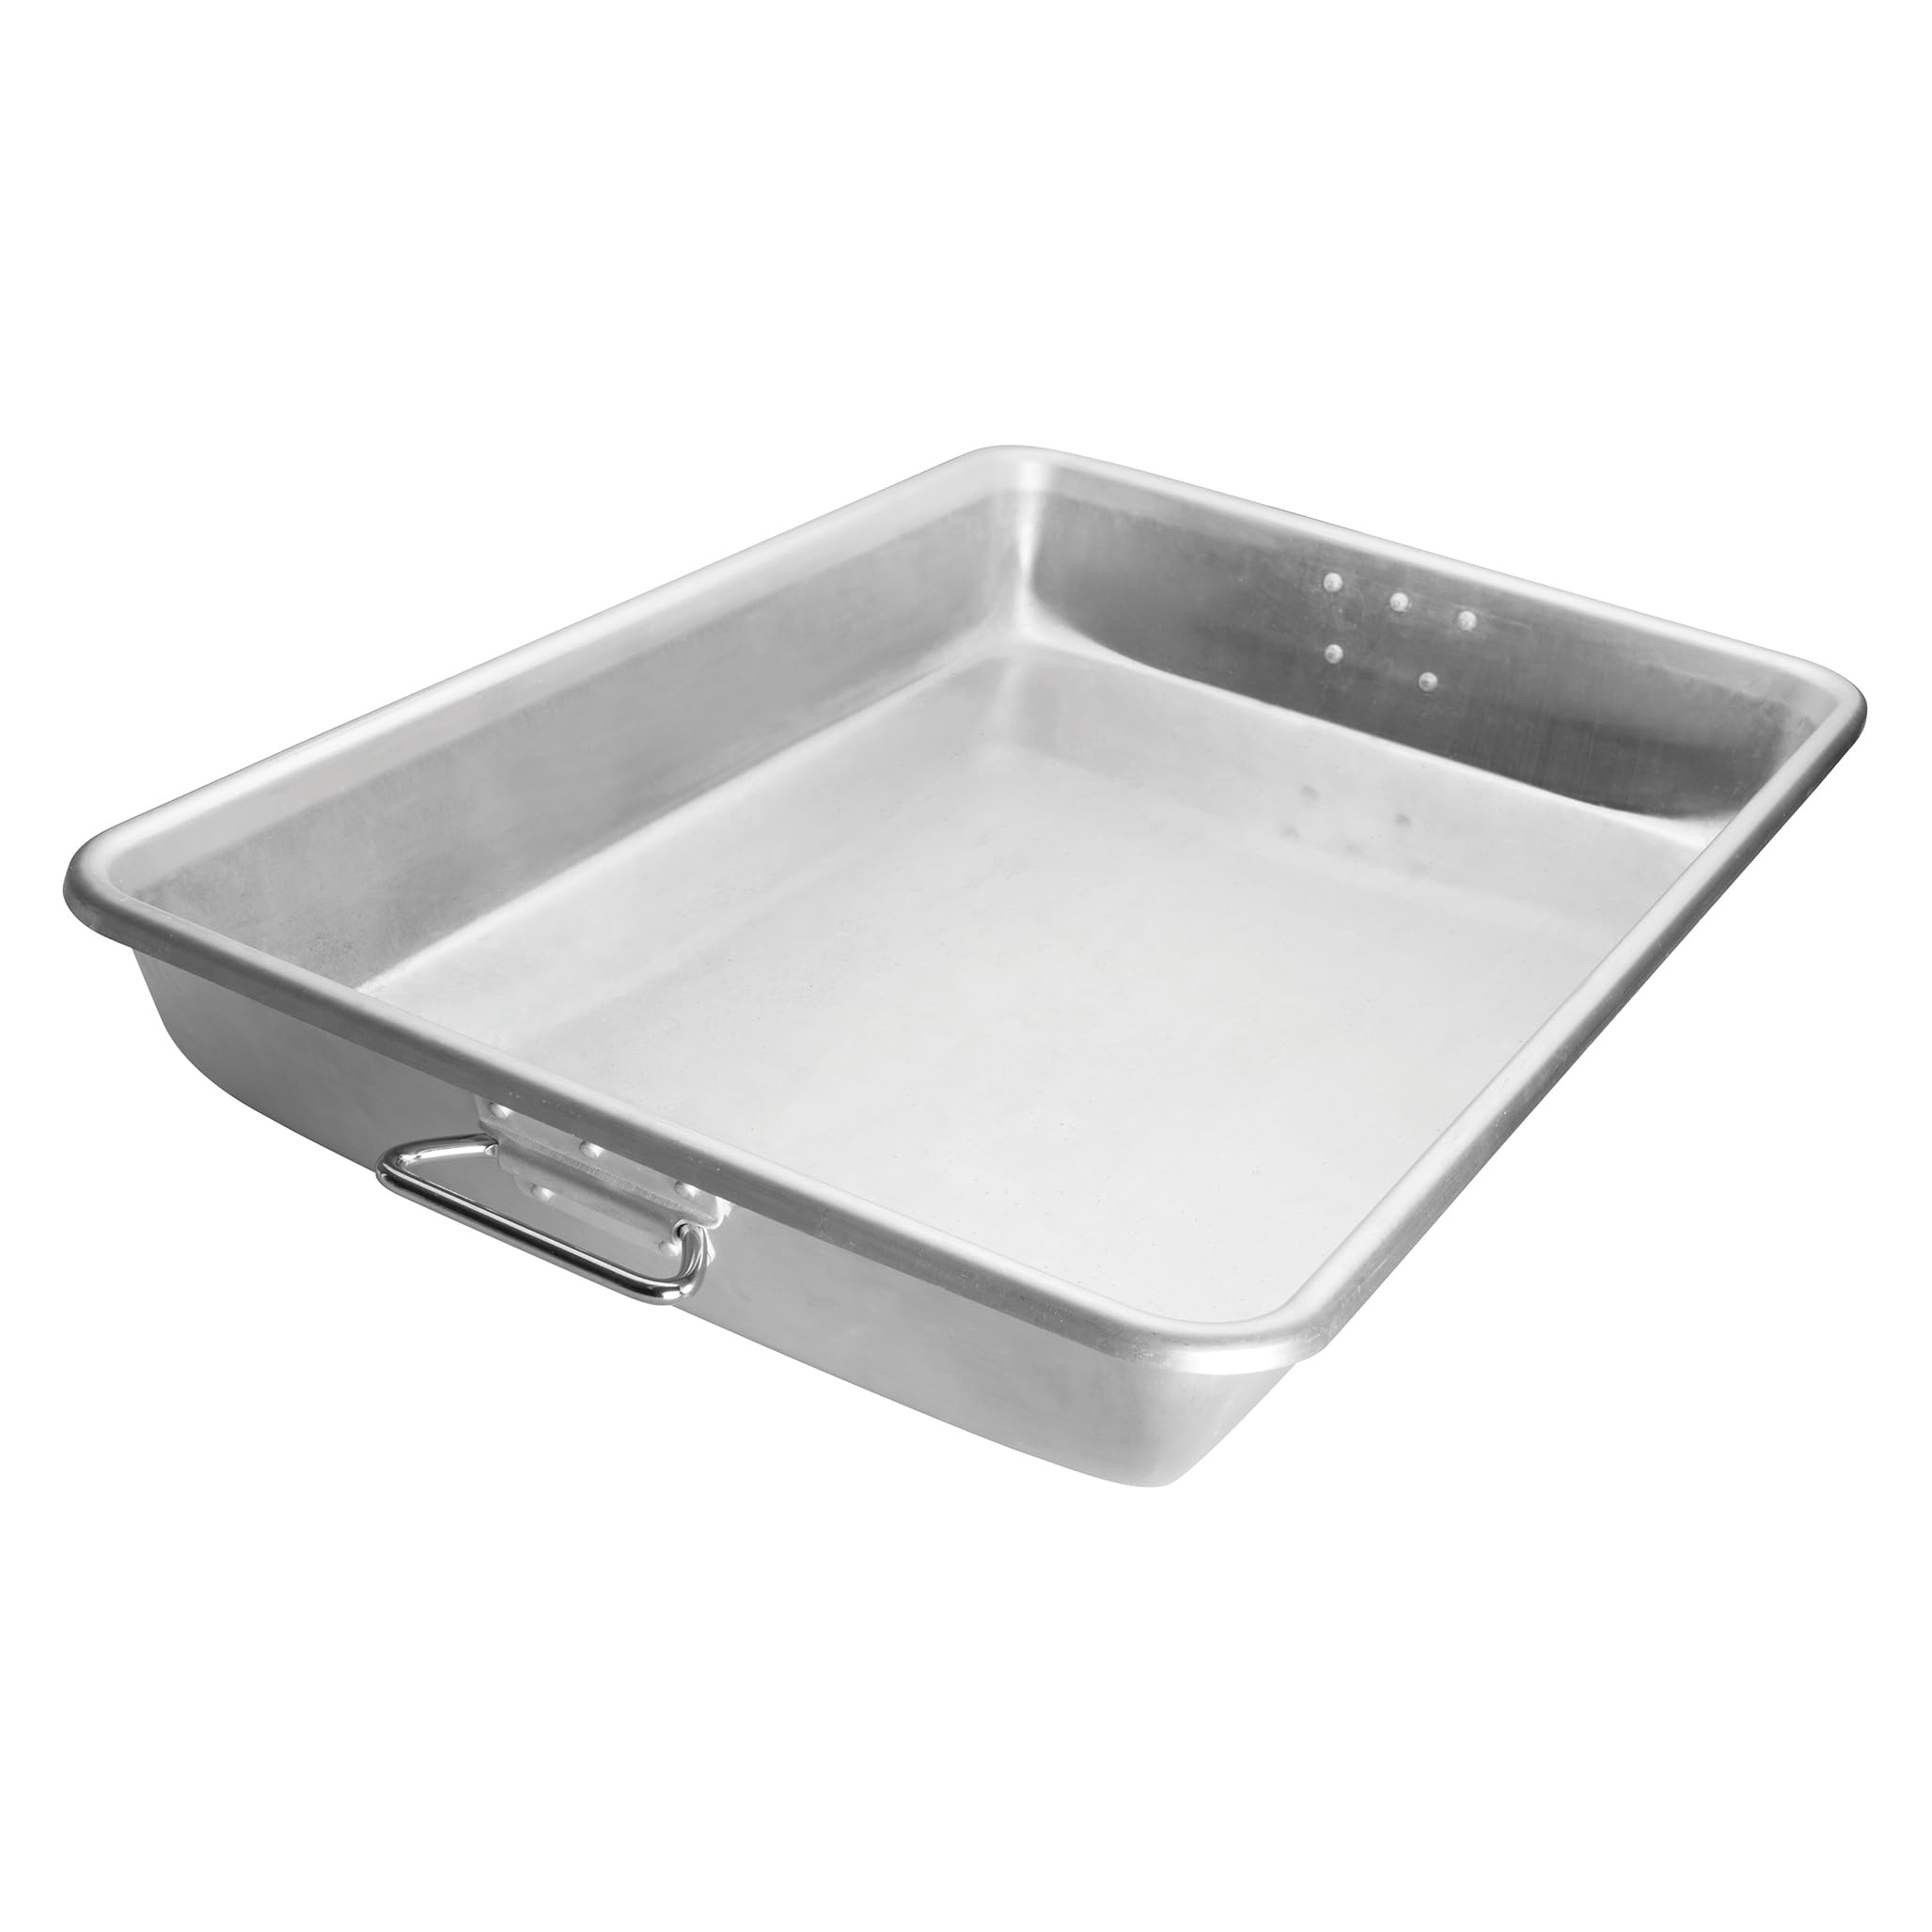 Winco Winware Bake and Roast Pan 26 Inch x 18 Inch x 3-1/2 Inch with Handles